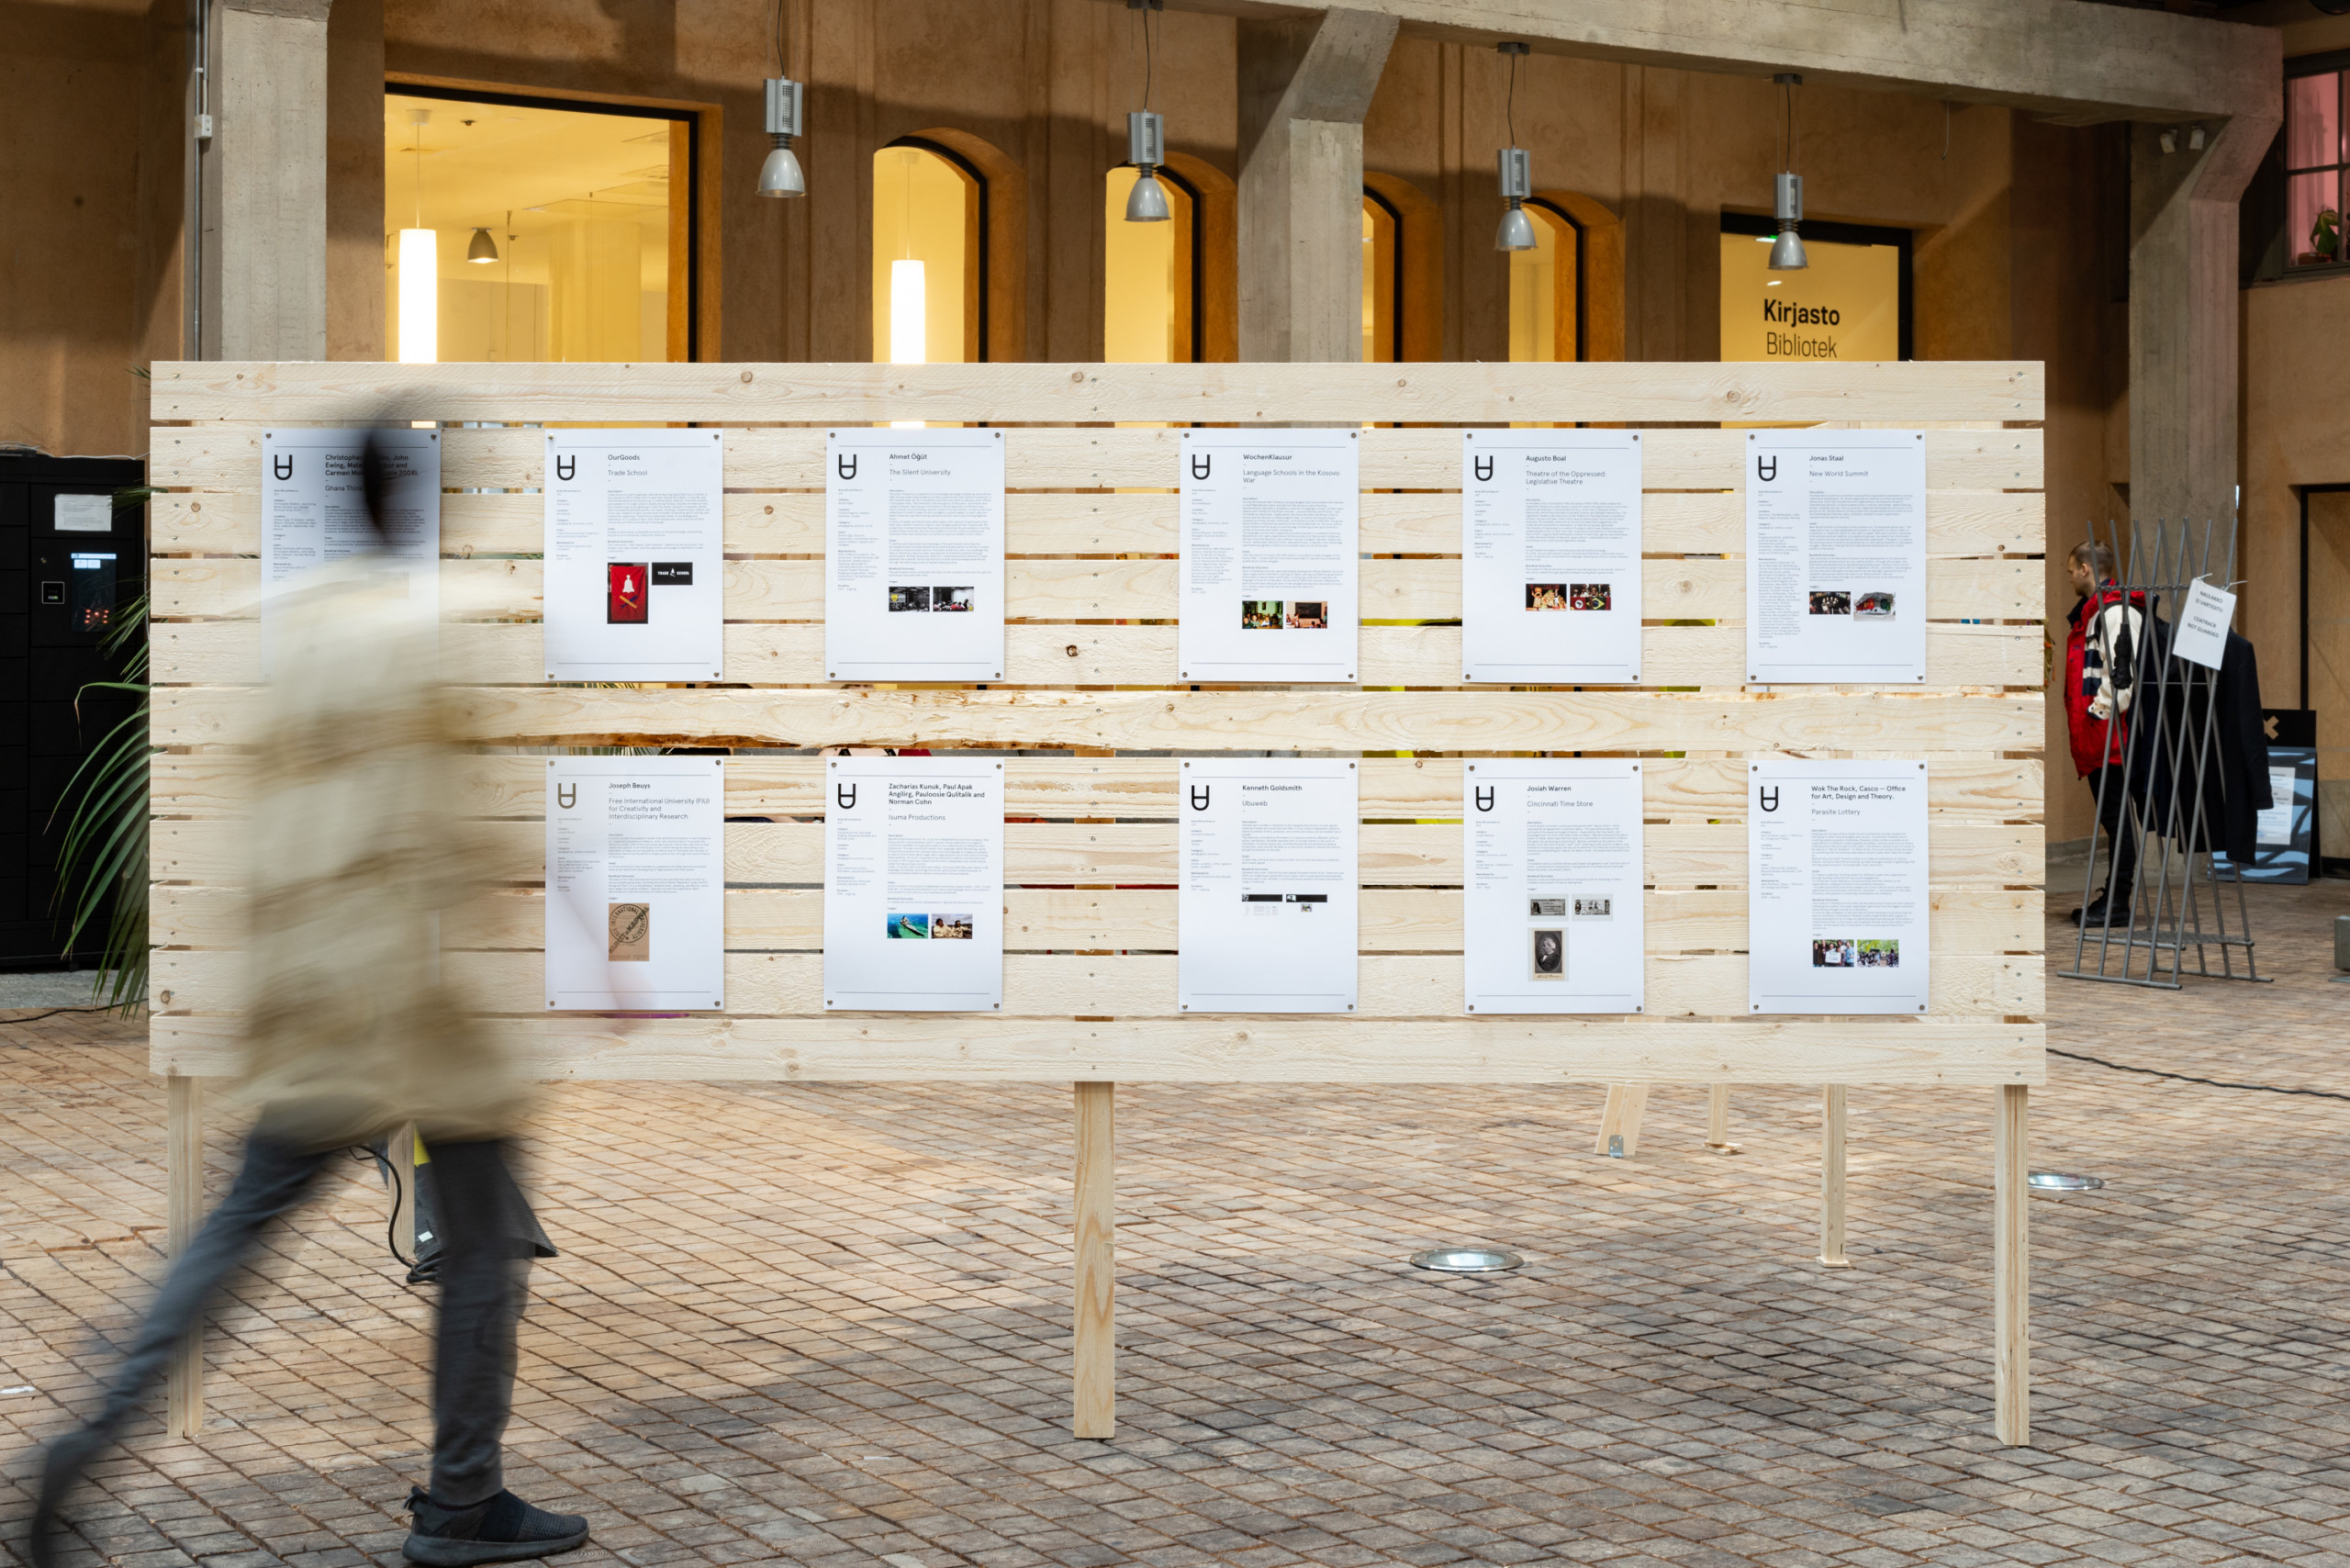 An image of a person walking and appearing blurry in front of a wooden wall-like board, which has 10 A4 size prints with images and text attached to it.